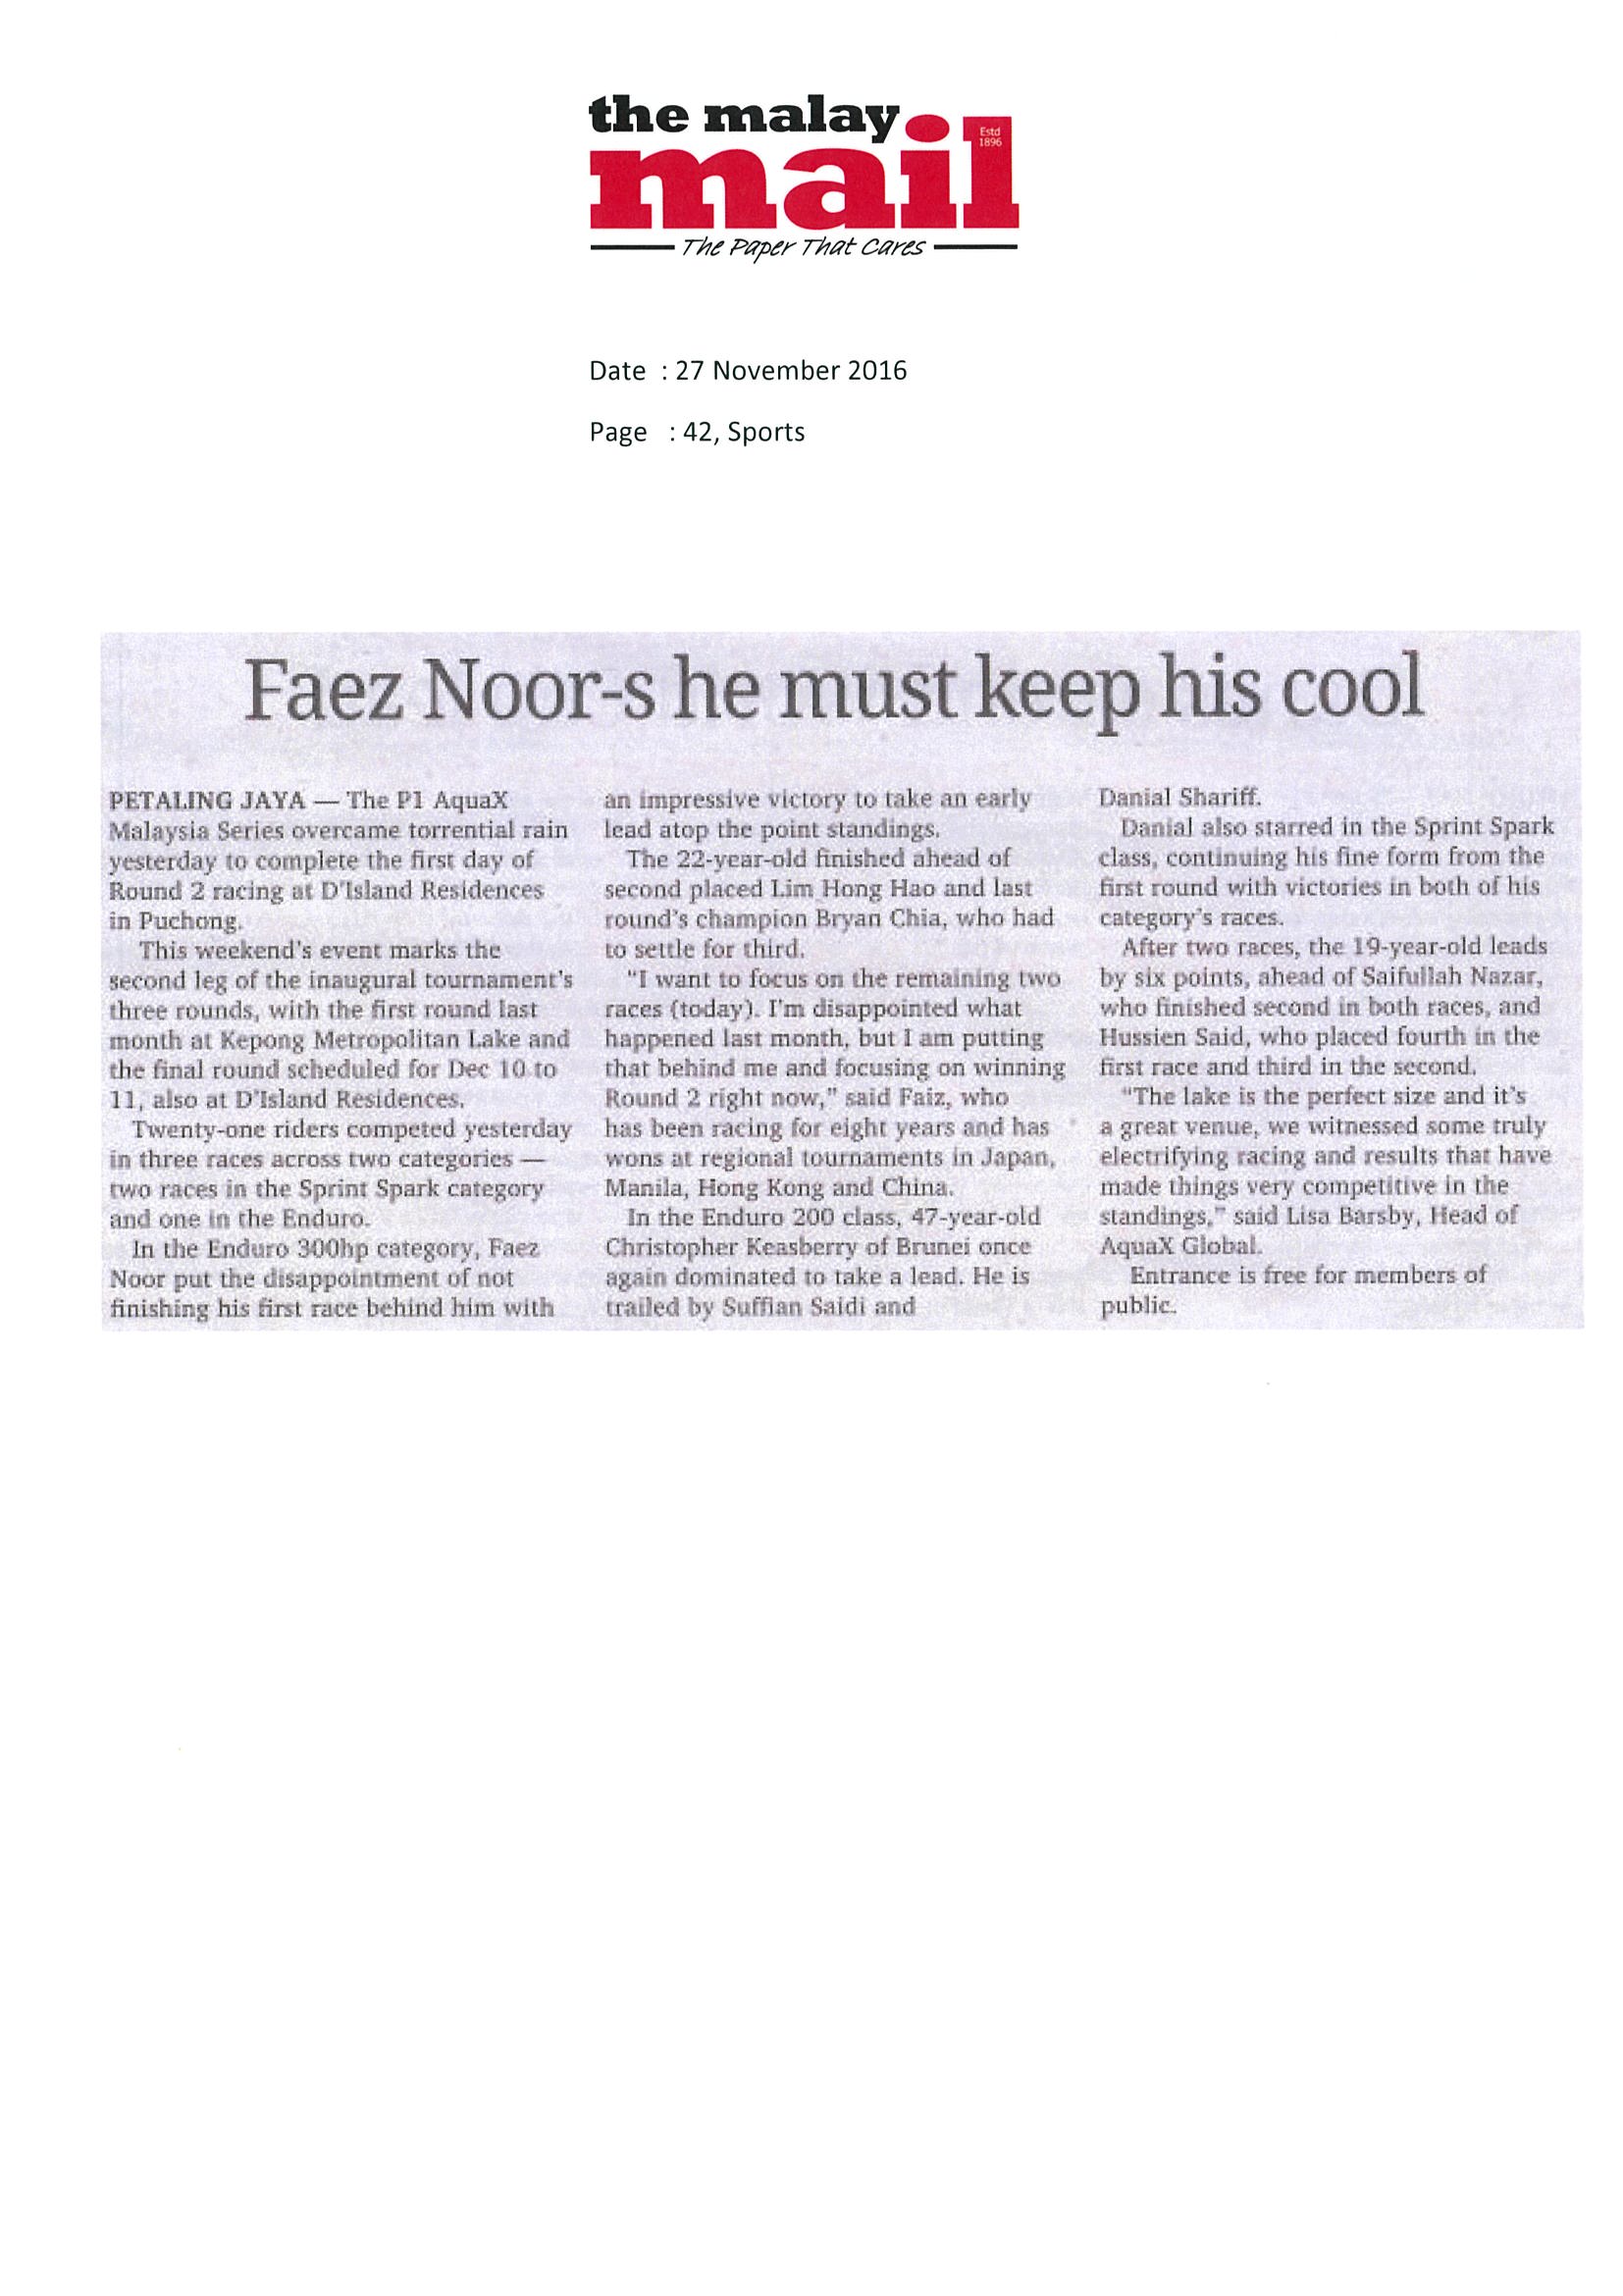 2016.12.27 Malay Mail – Faez Noor-s he must keep his cool